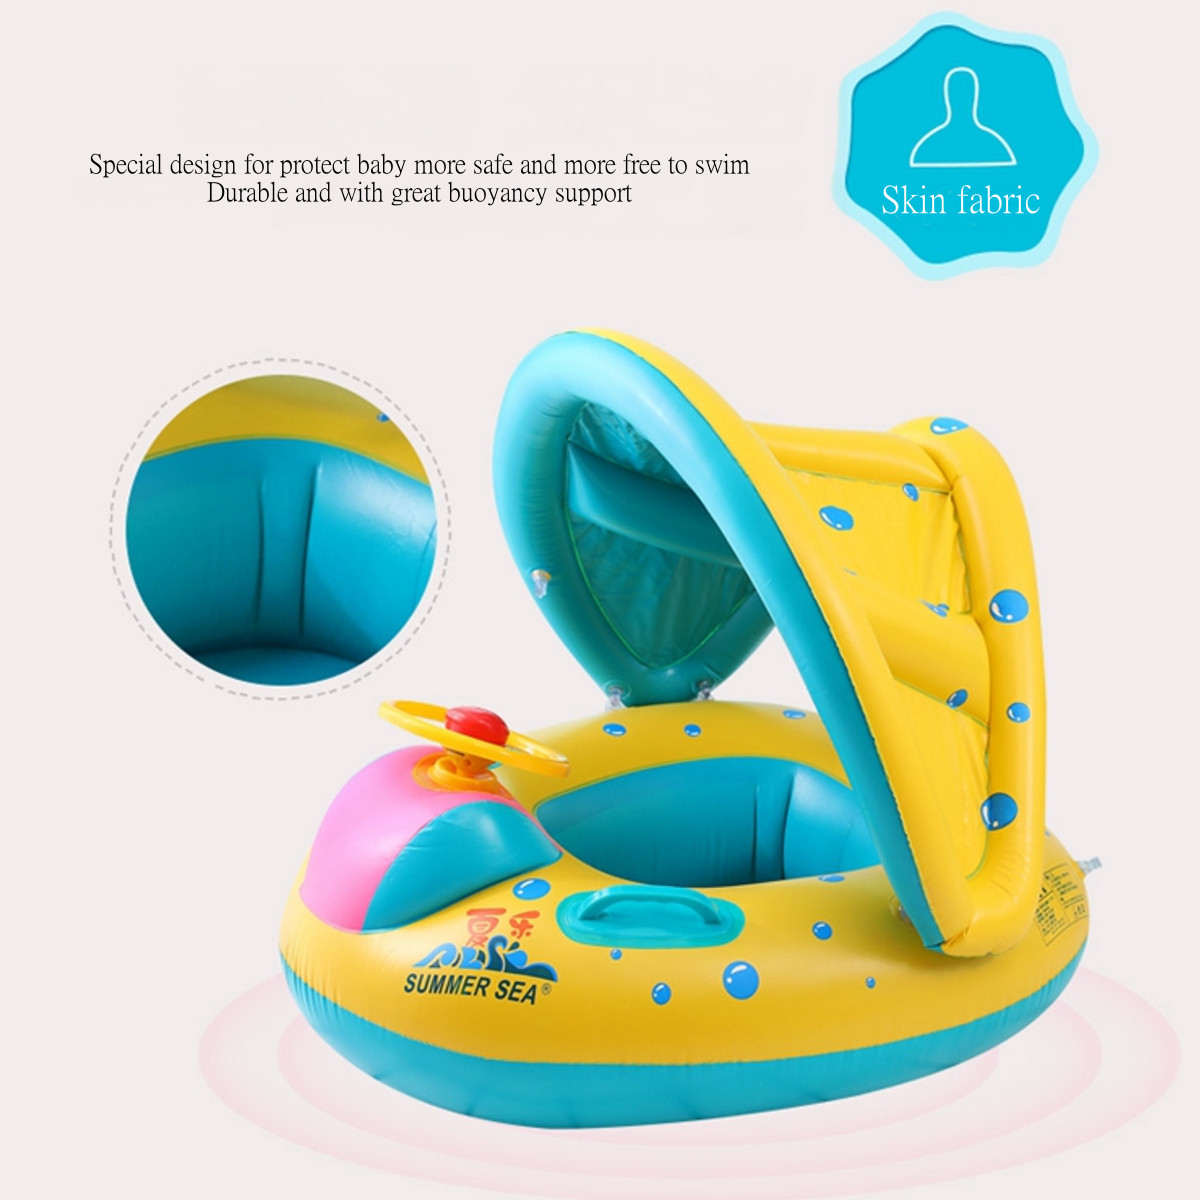 Baby-Inflatable-Swimming-Float-Ring-PVC-Lying-Water-Seat-Boat-Sunshade-Pool-Mattress-with-Canopy-Kid-1869041-5